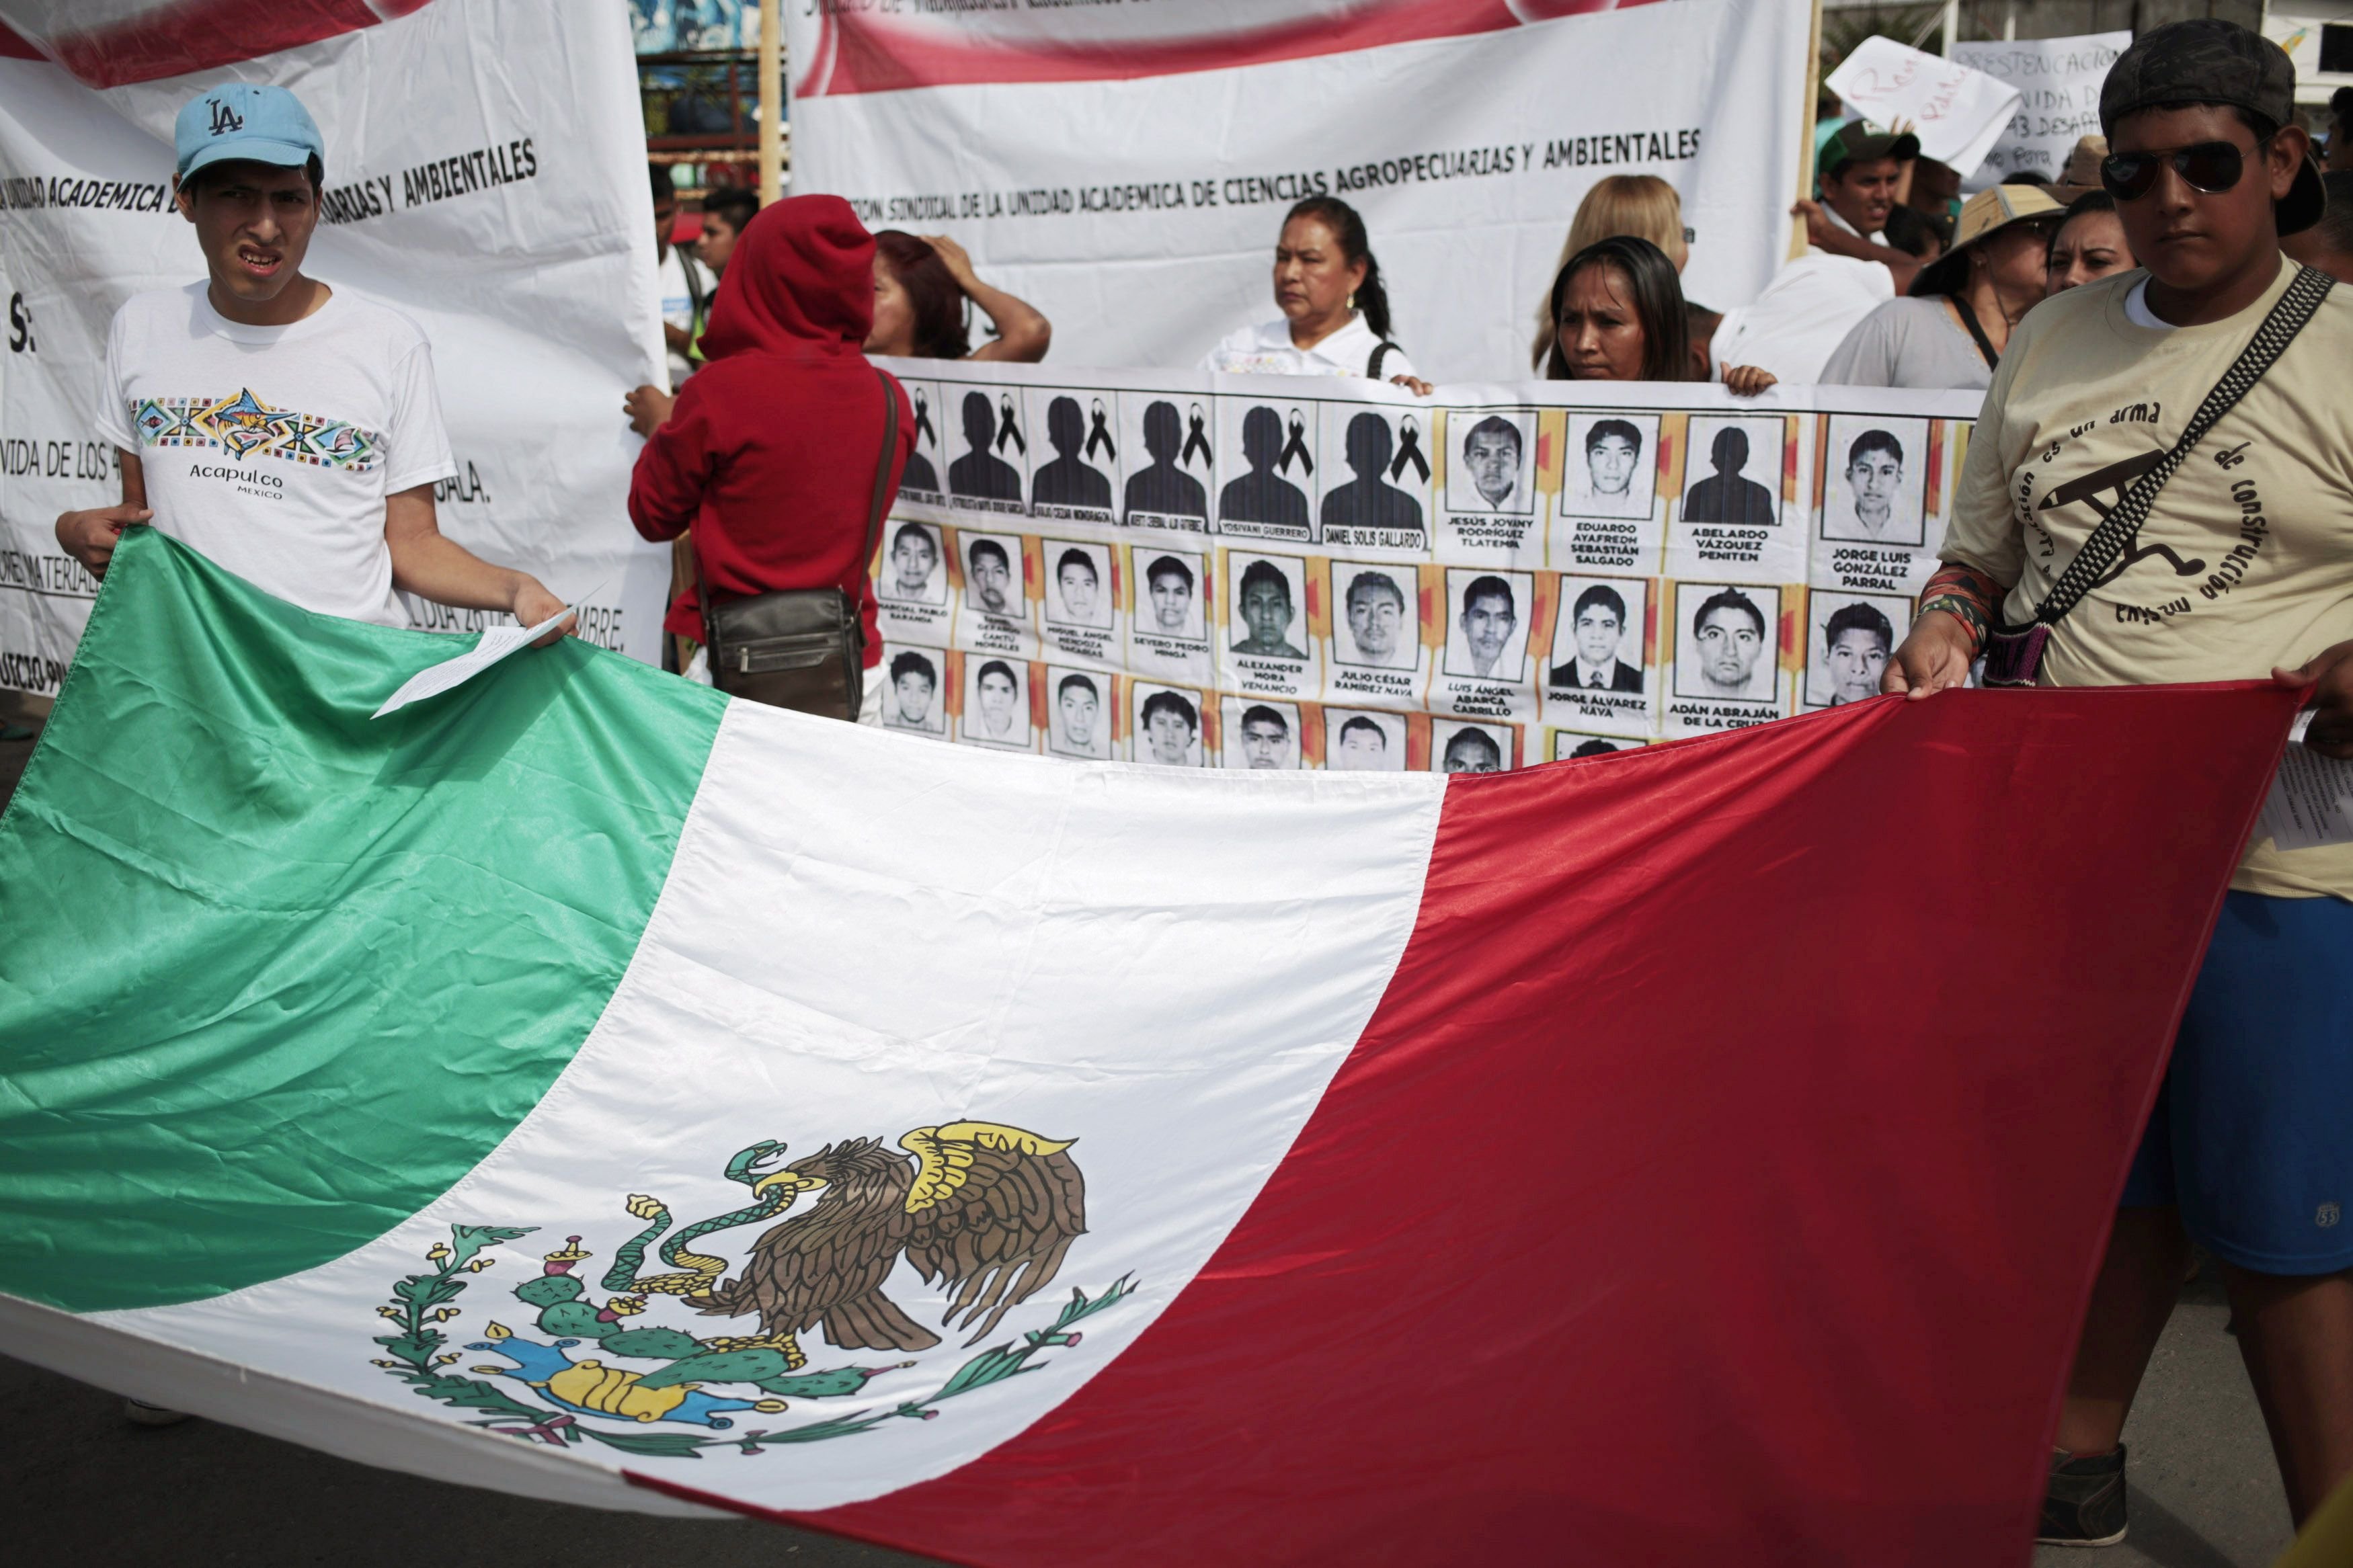 People hold a Mexican flag during a demonstration to demand information for the 43 missing students of the Ayotzinapa teachers' training college, in Iguala, the southern Mexican state of Guerrero on Oct. 22, 2014.